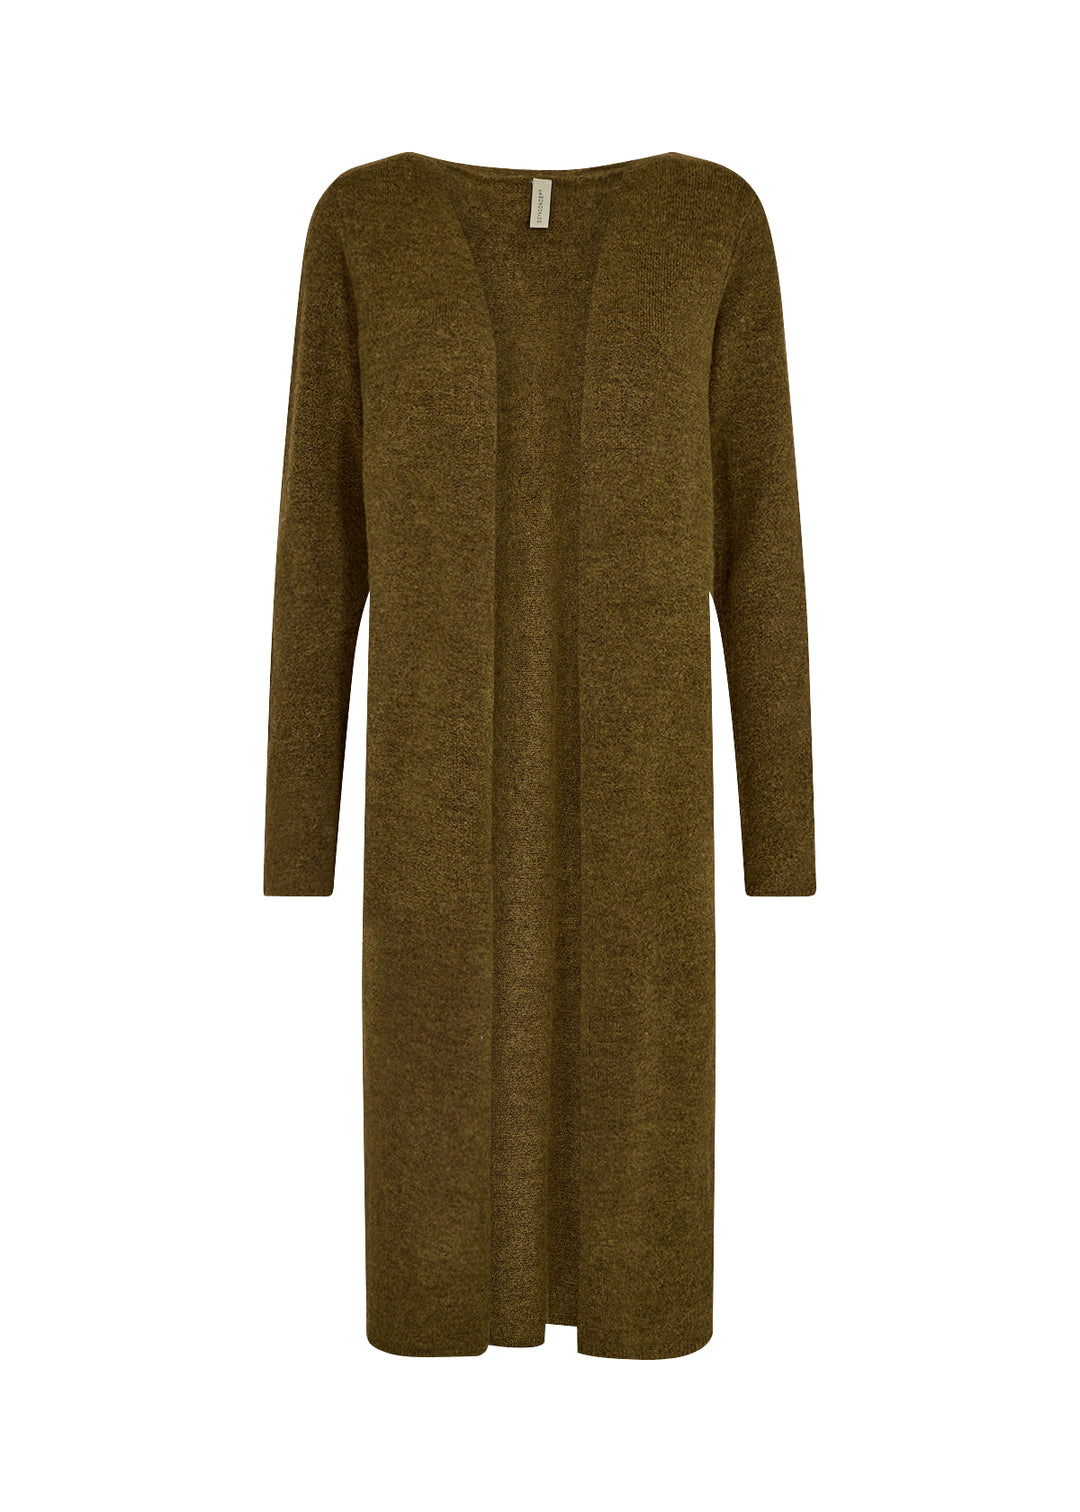 The Nessie Long Cardigan - Spice Brown Melange